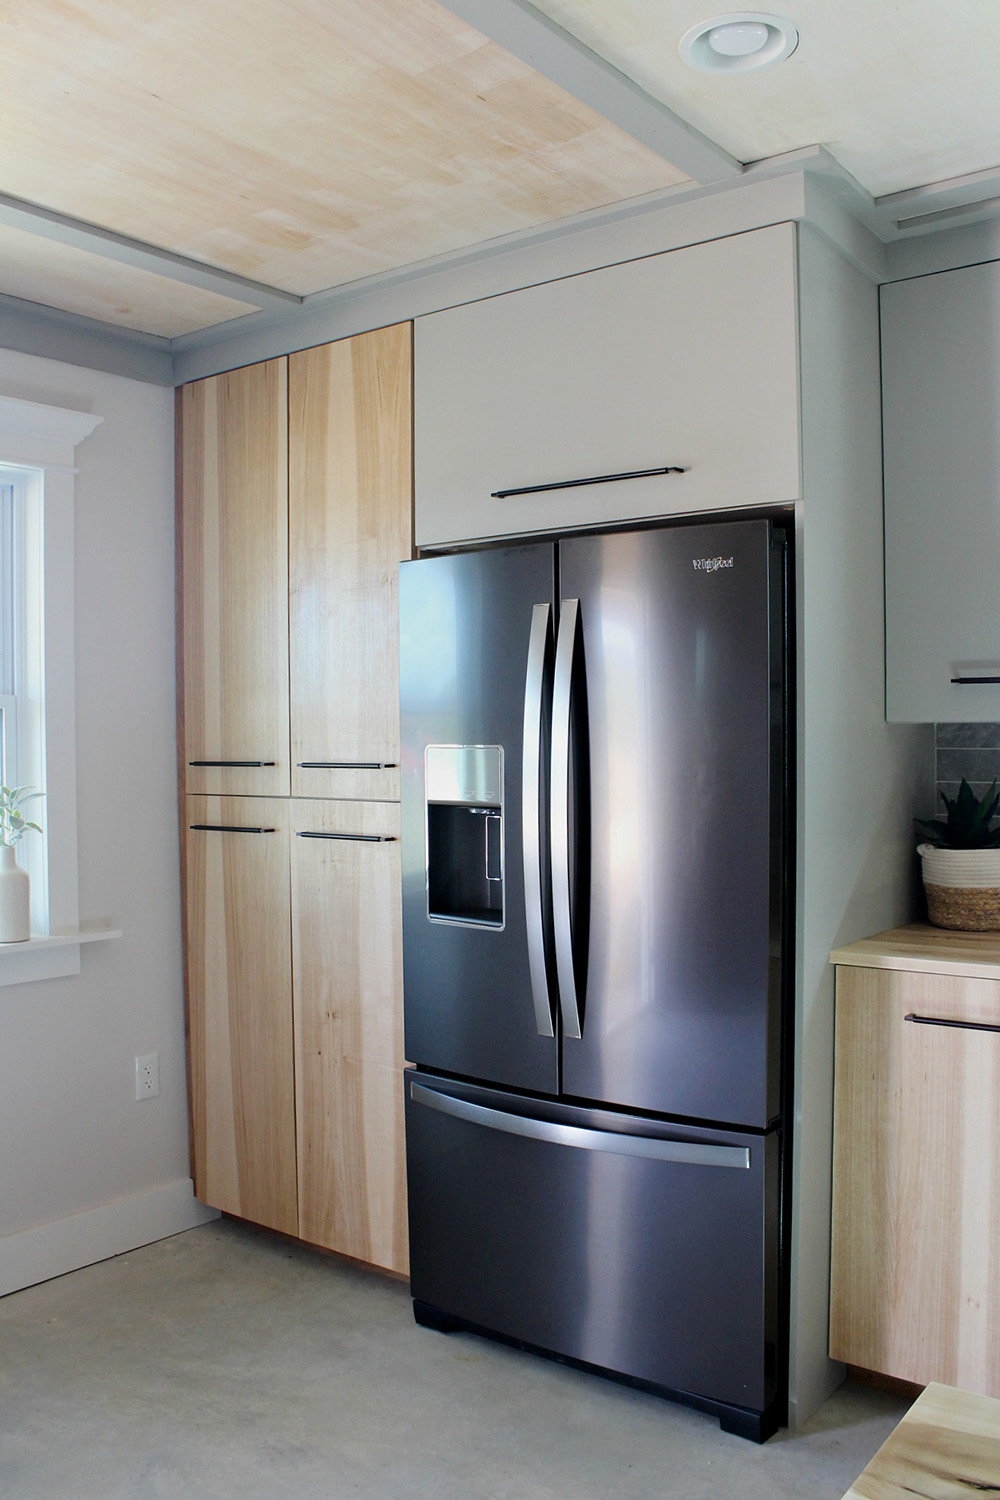 How to Design a Kitchen Space With Appliances in Mind